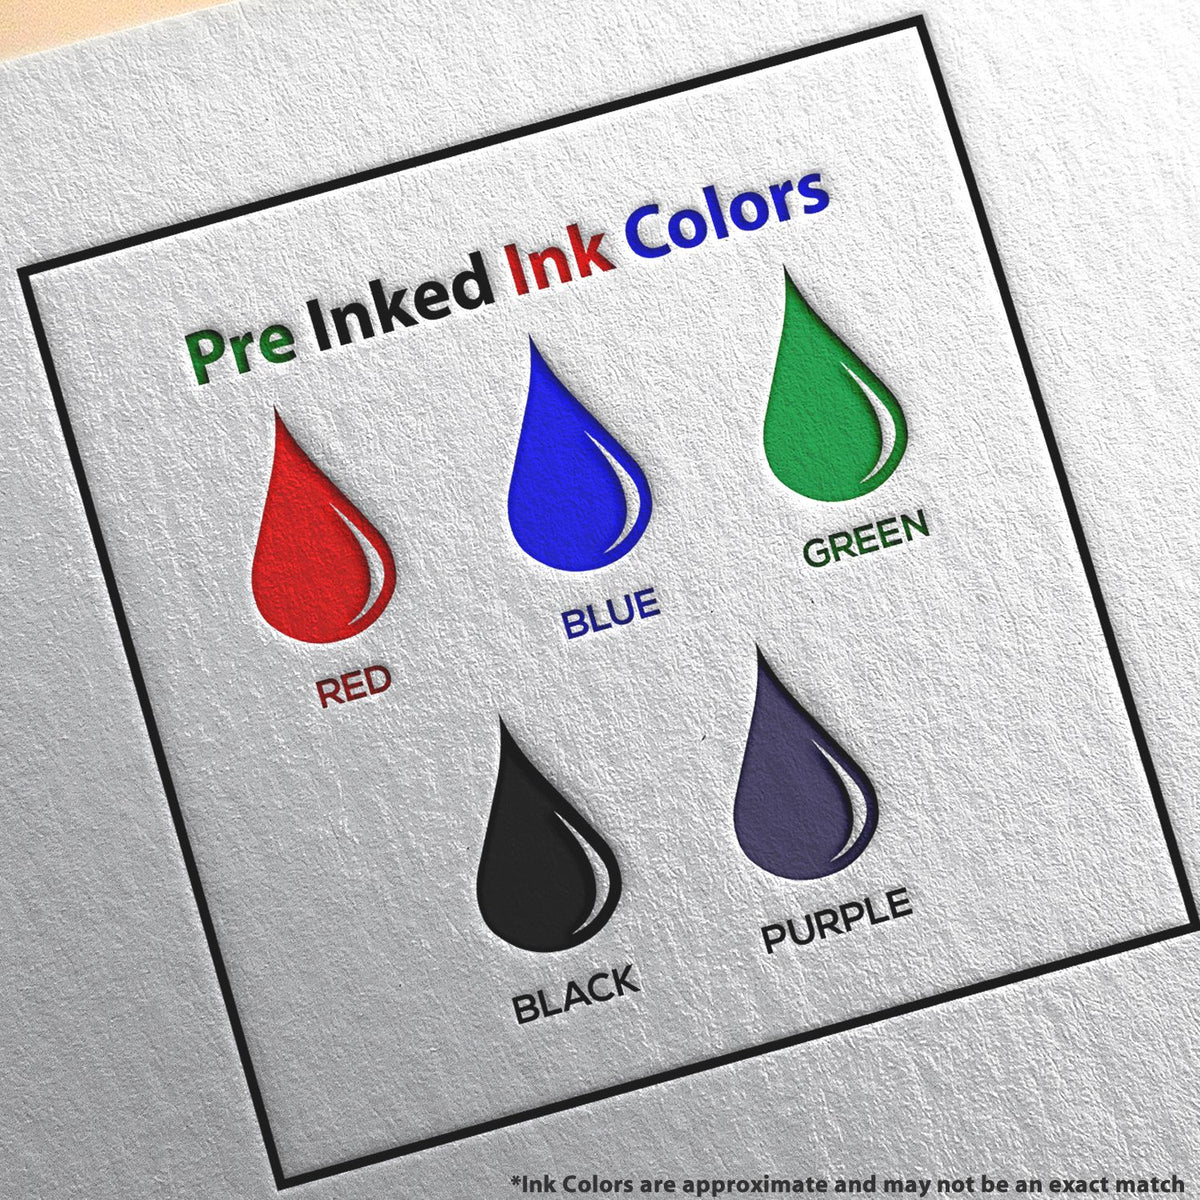 A picture showing the different ink colors or hues available for the Slim Pre-Inked New Hampshire Land Surveyor Seal Stamp product.